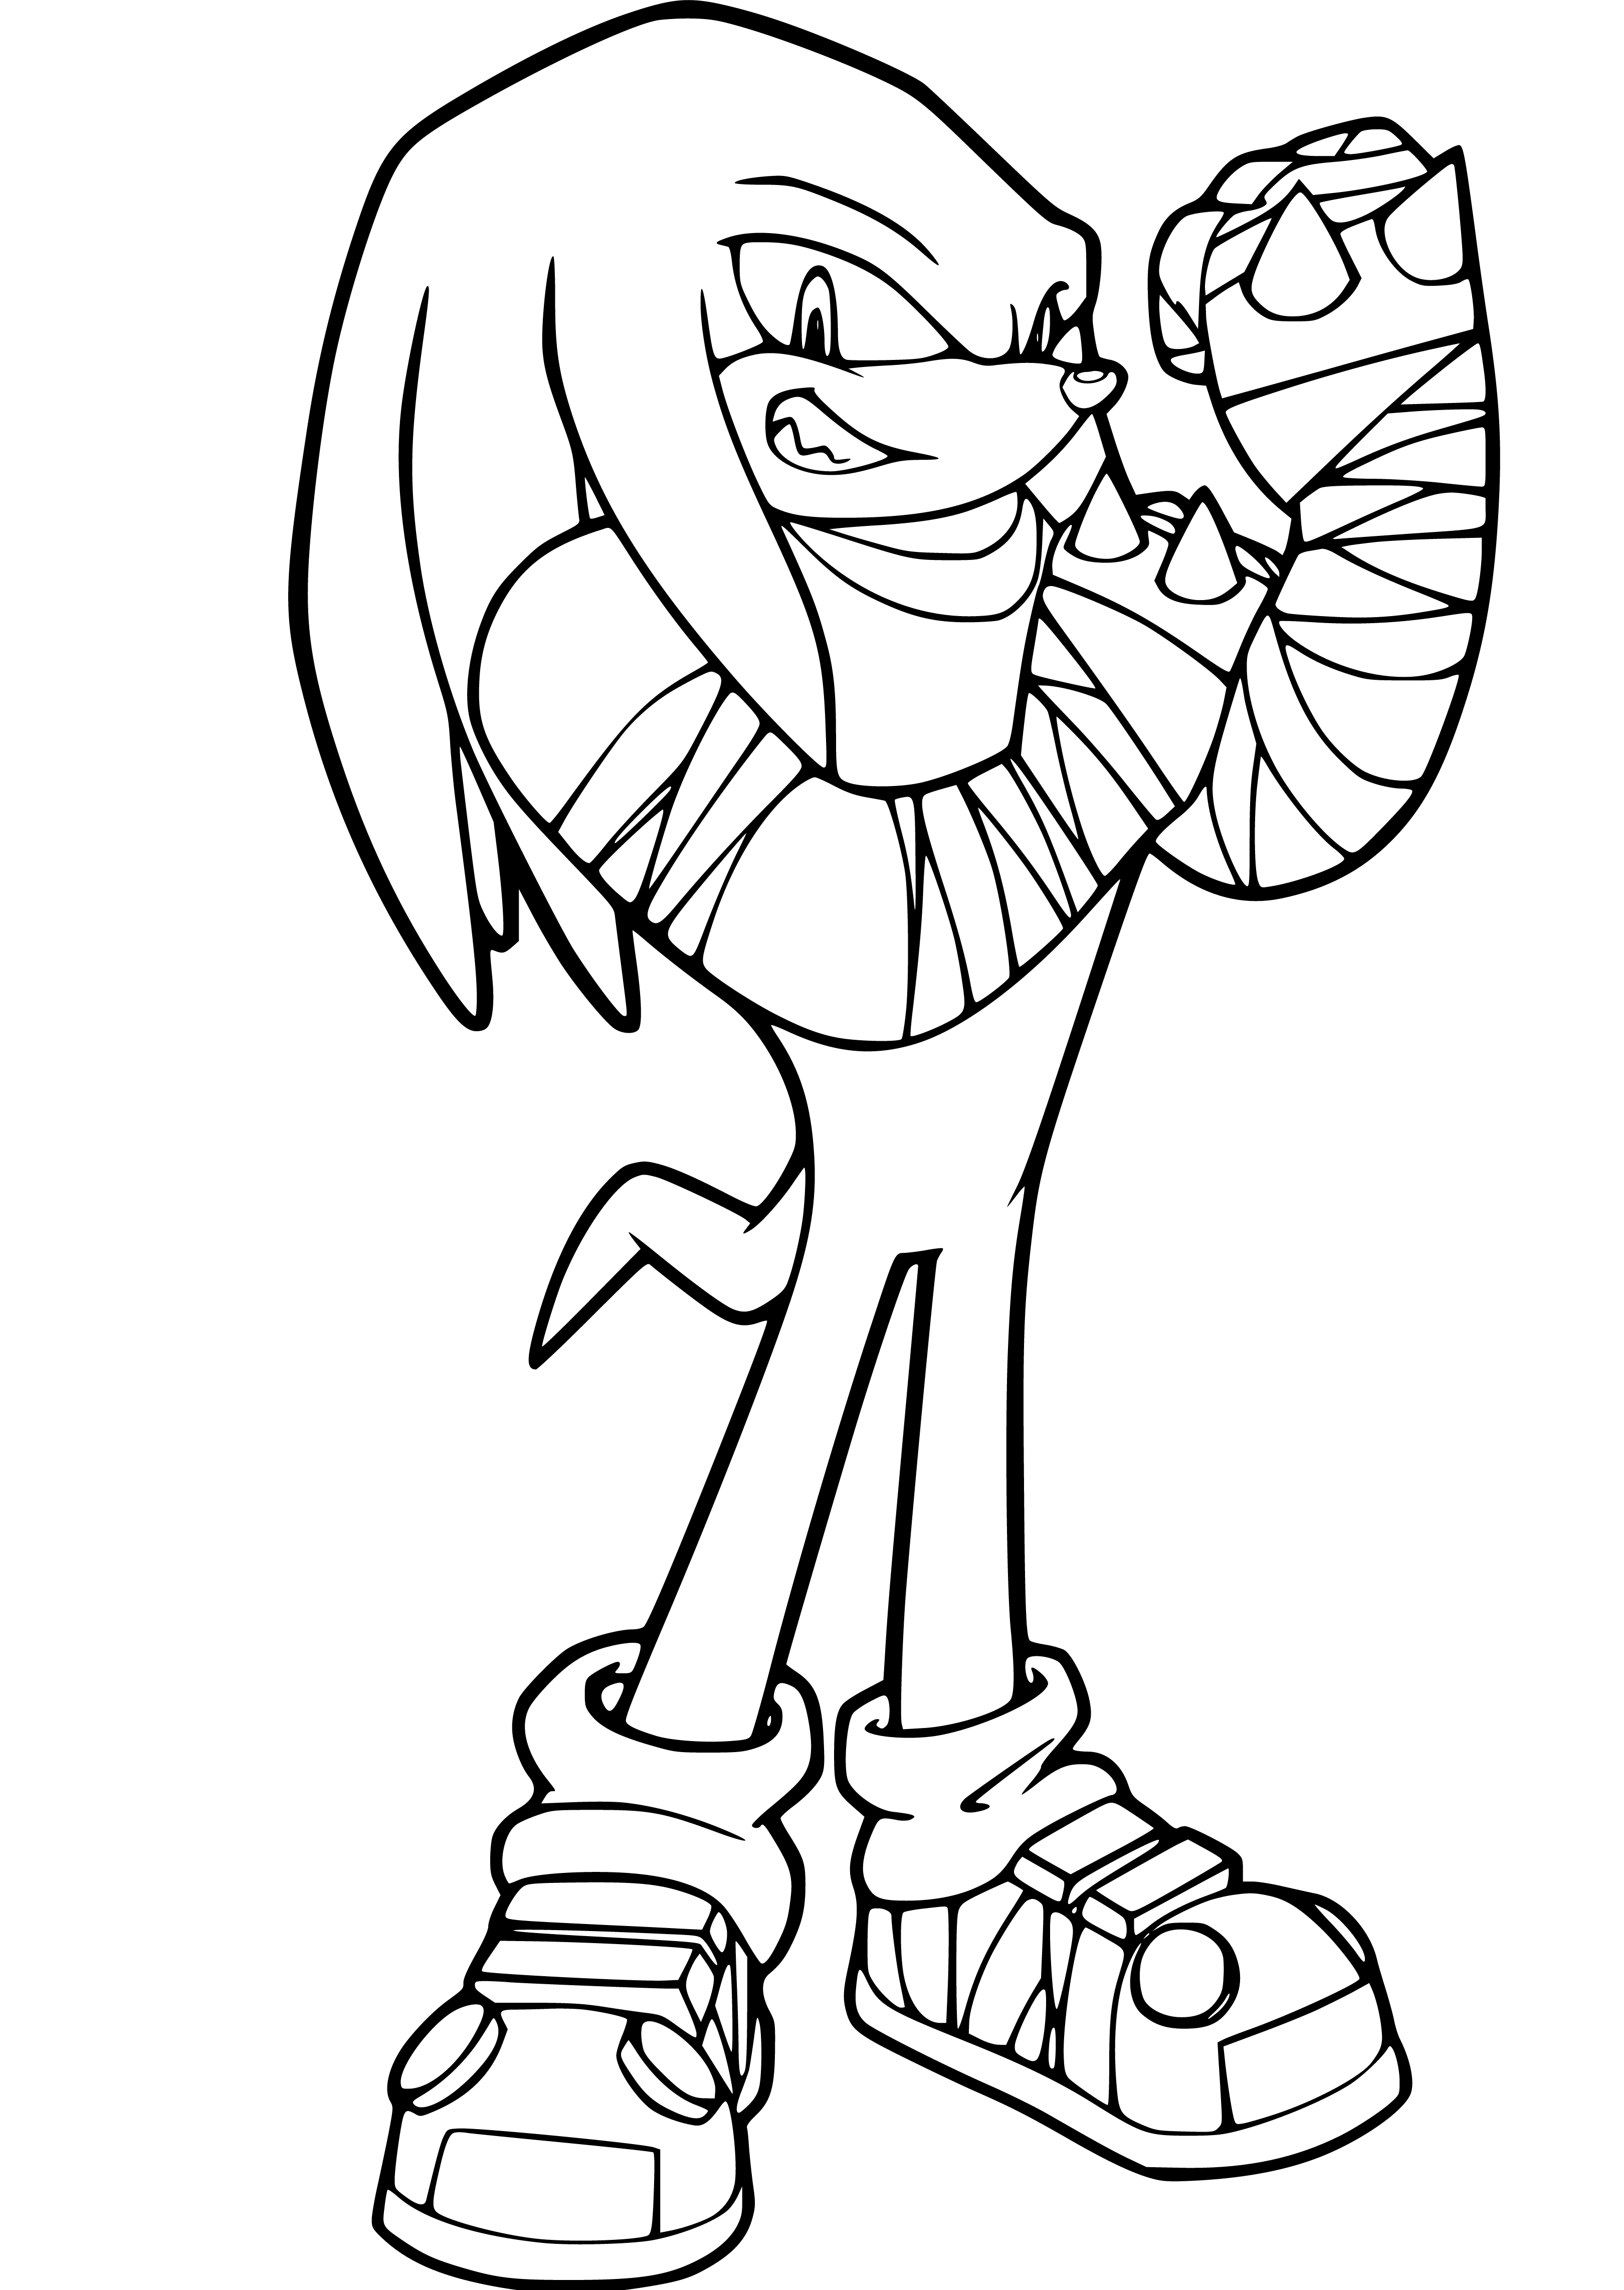 Knuckles the Echidna Coloring Sheet for Children Printable - SheetalColor.com